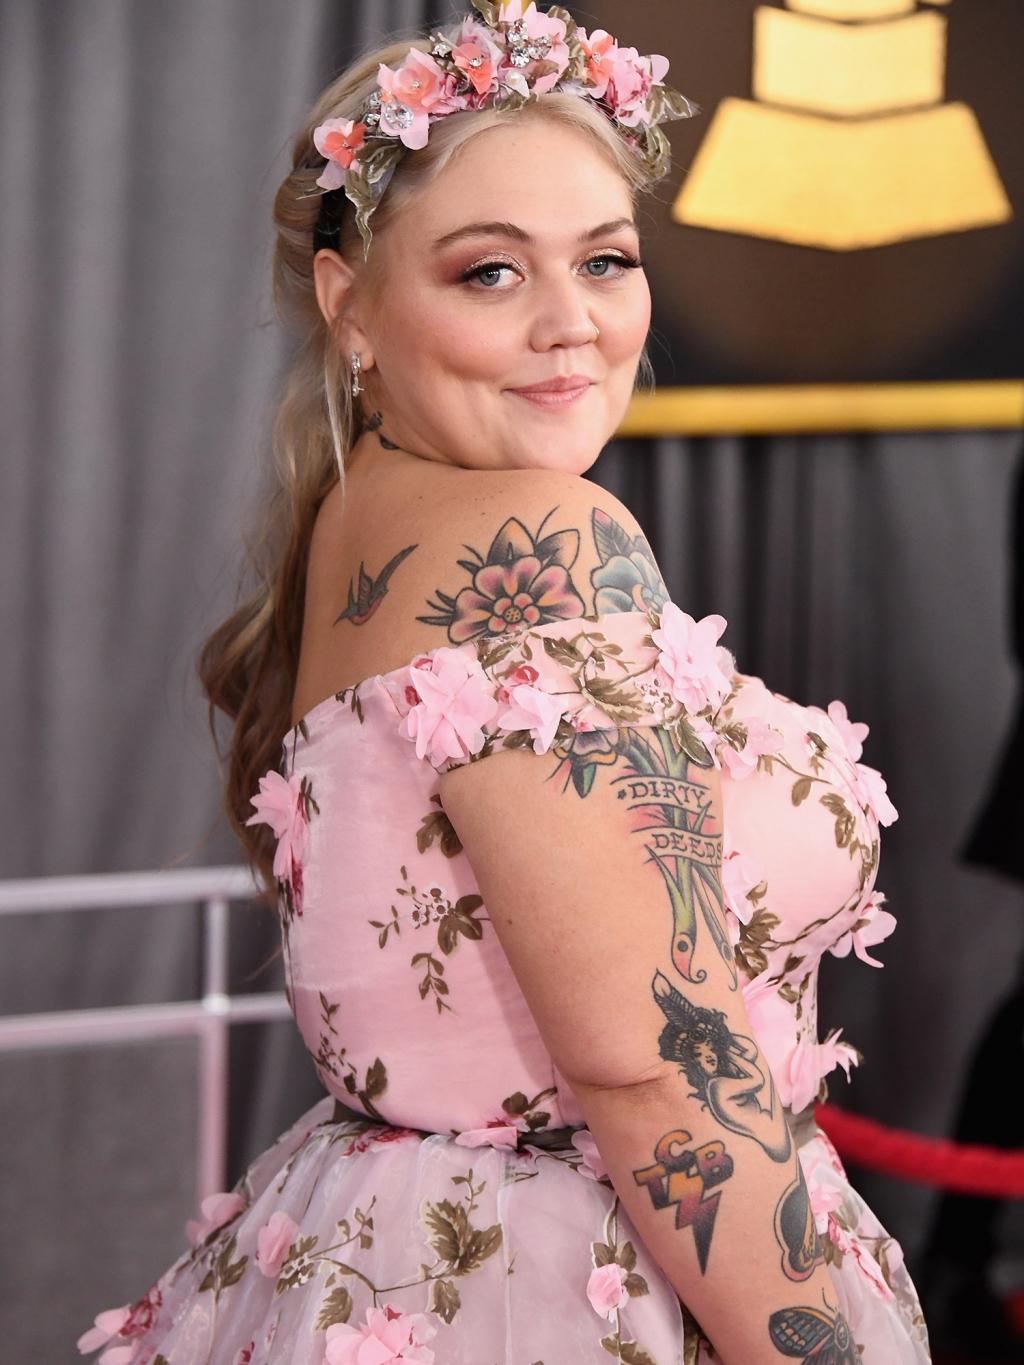 Singer Elle King Says She        Skipped Out on My Wedding      '  in Favor of Rock Show